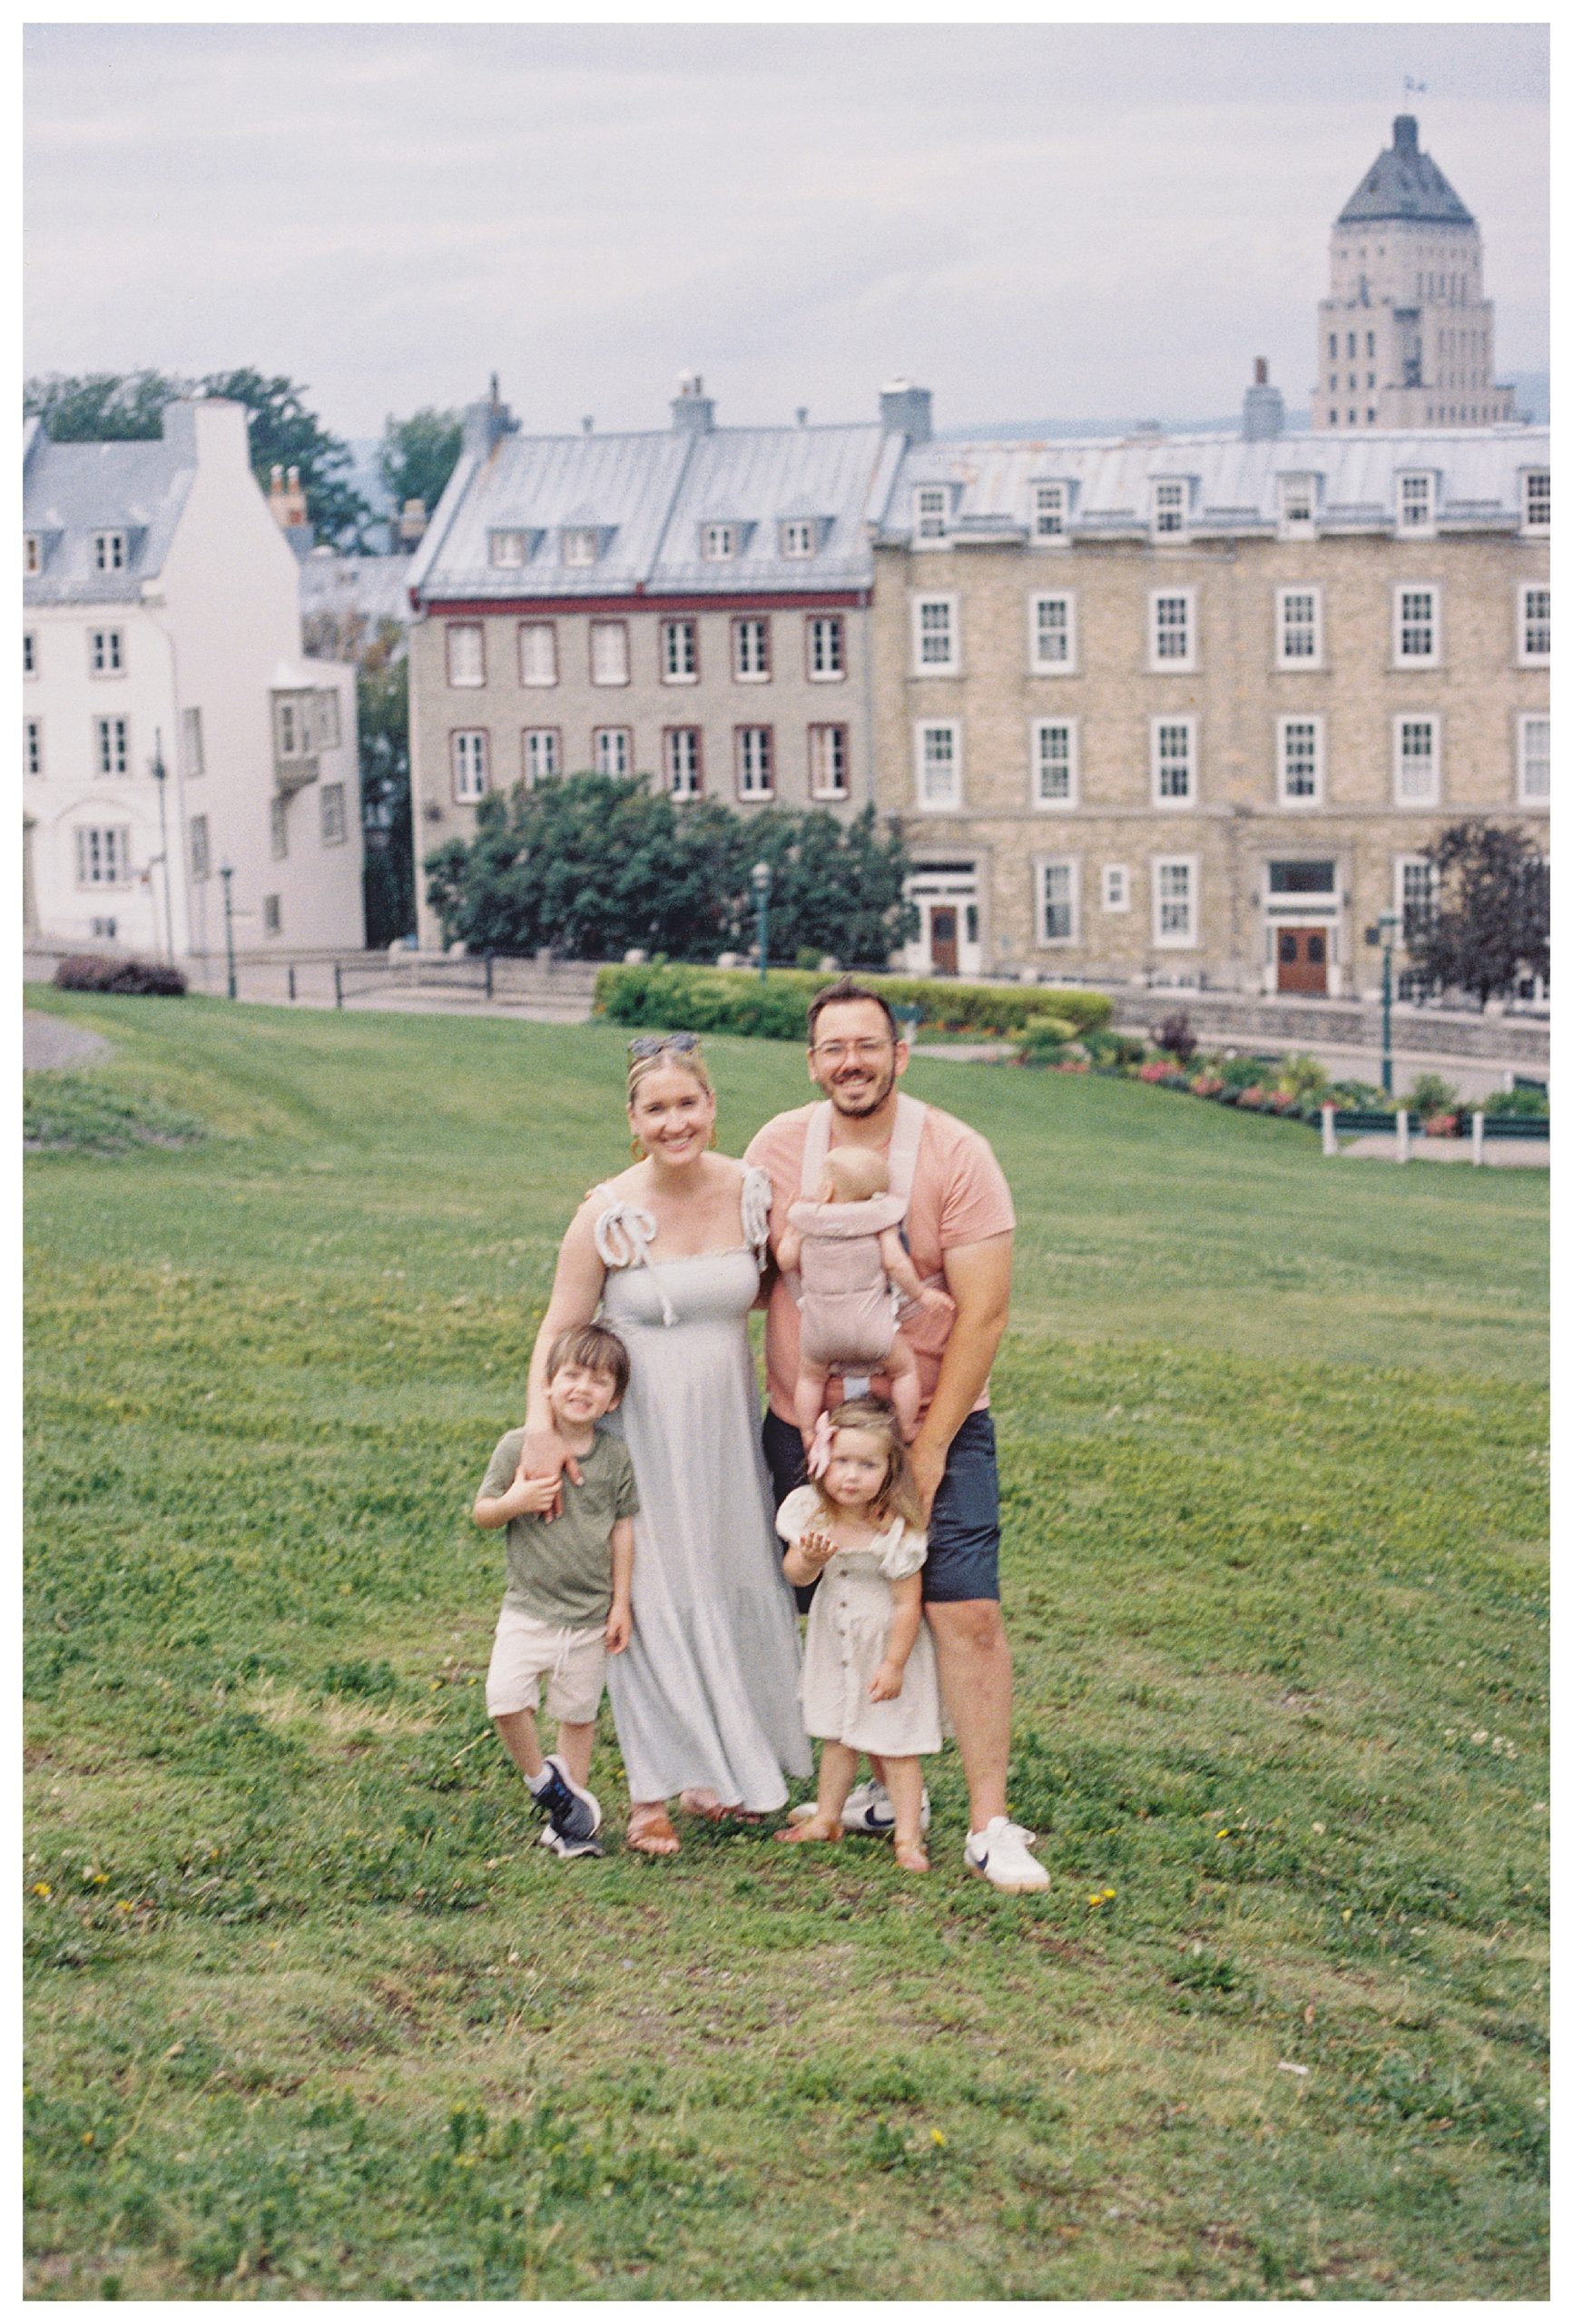 Family of five stands together in Quebec City grassy field.